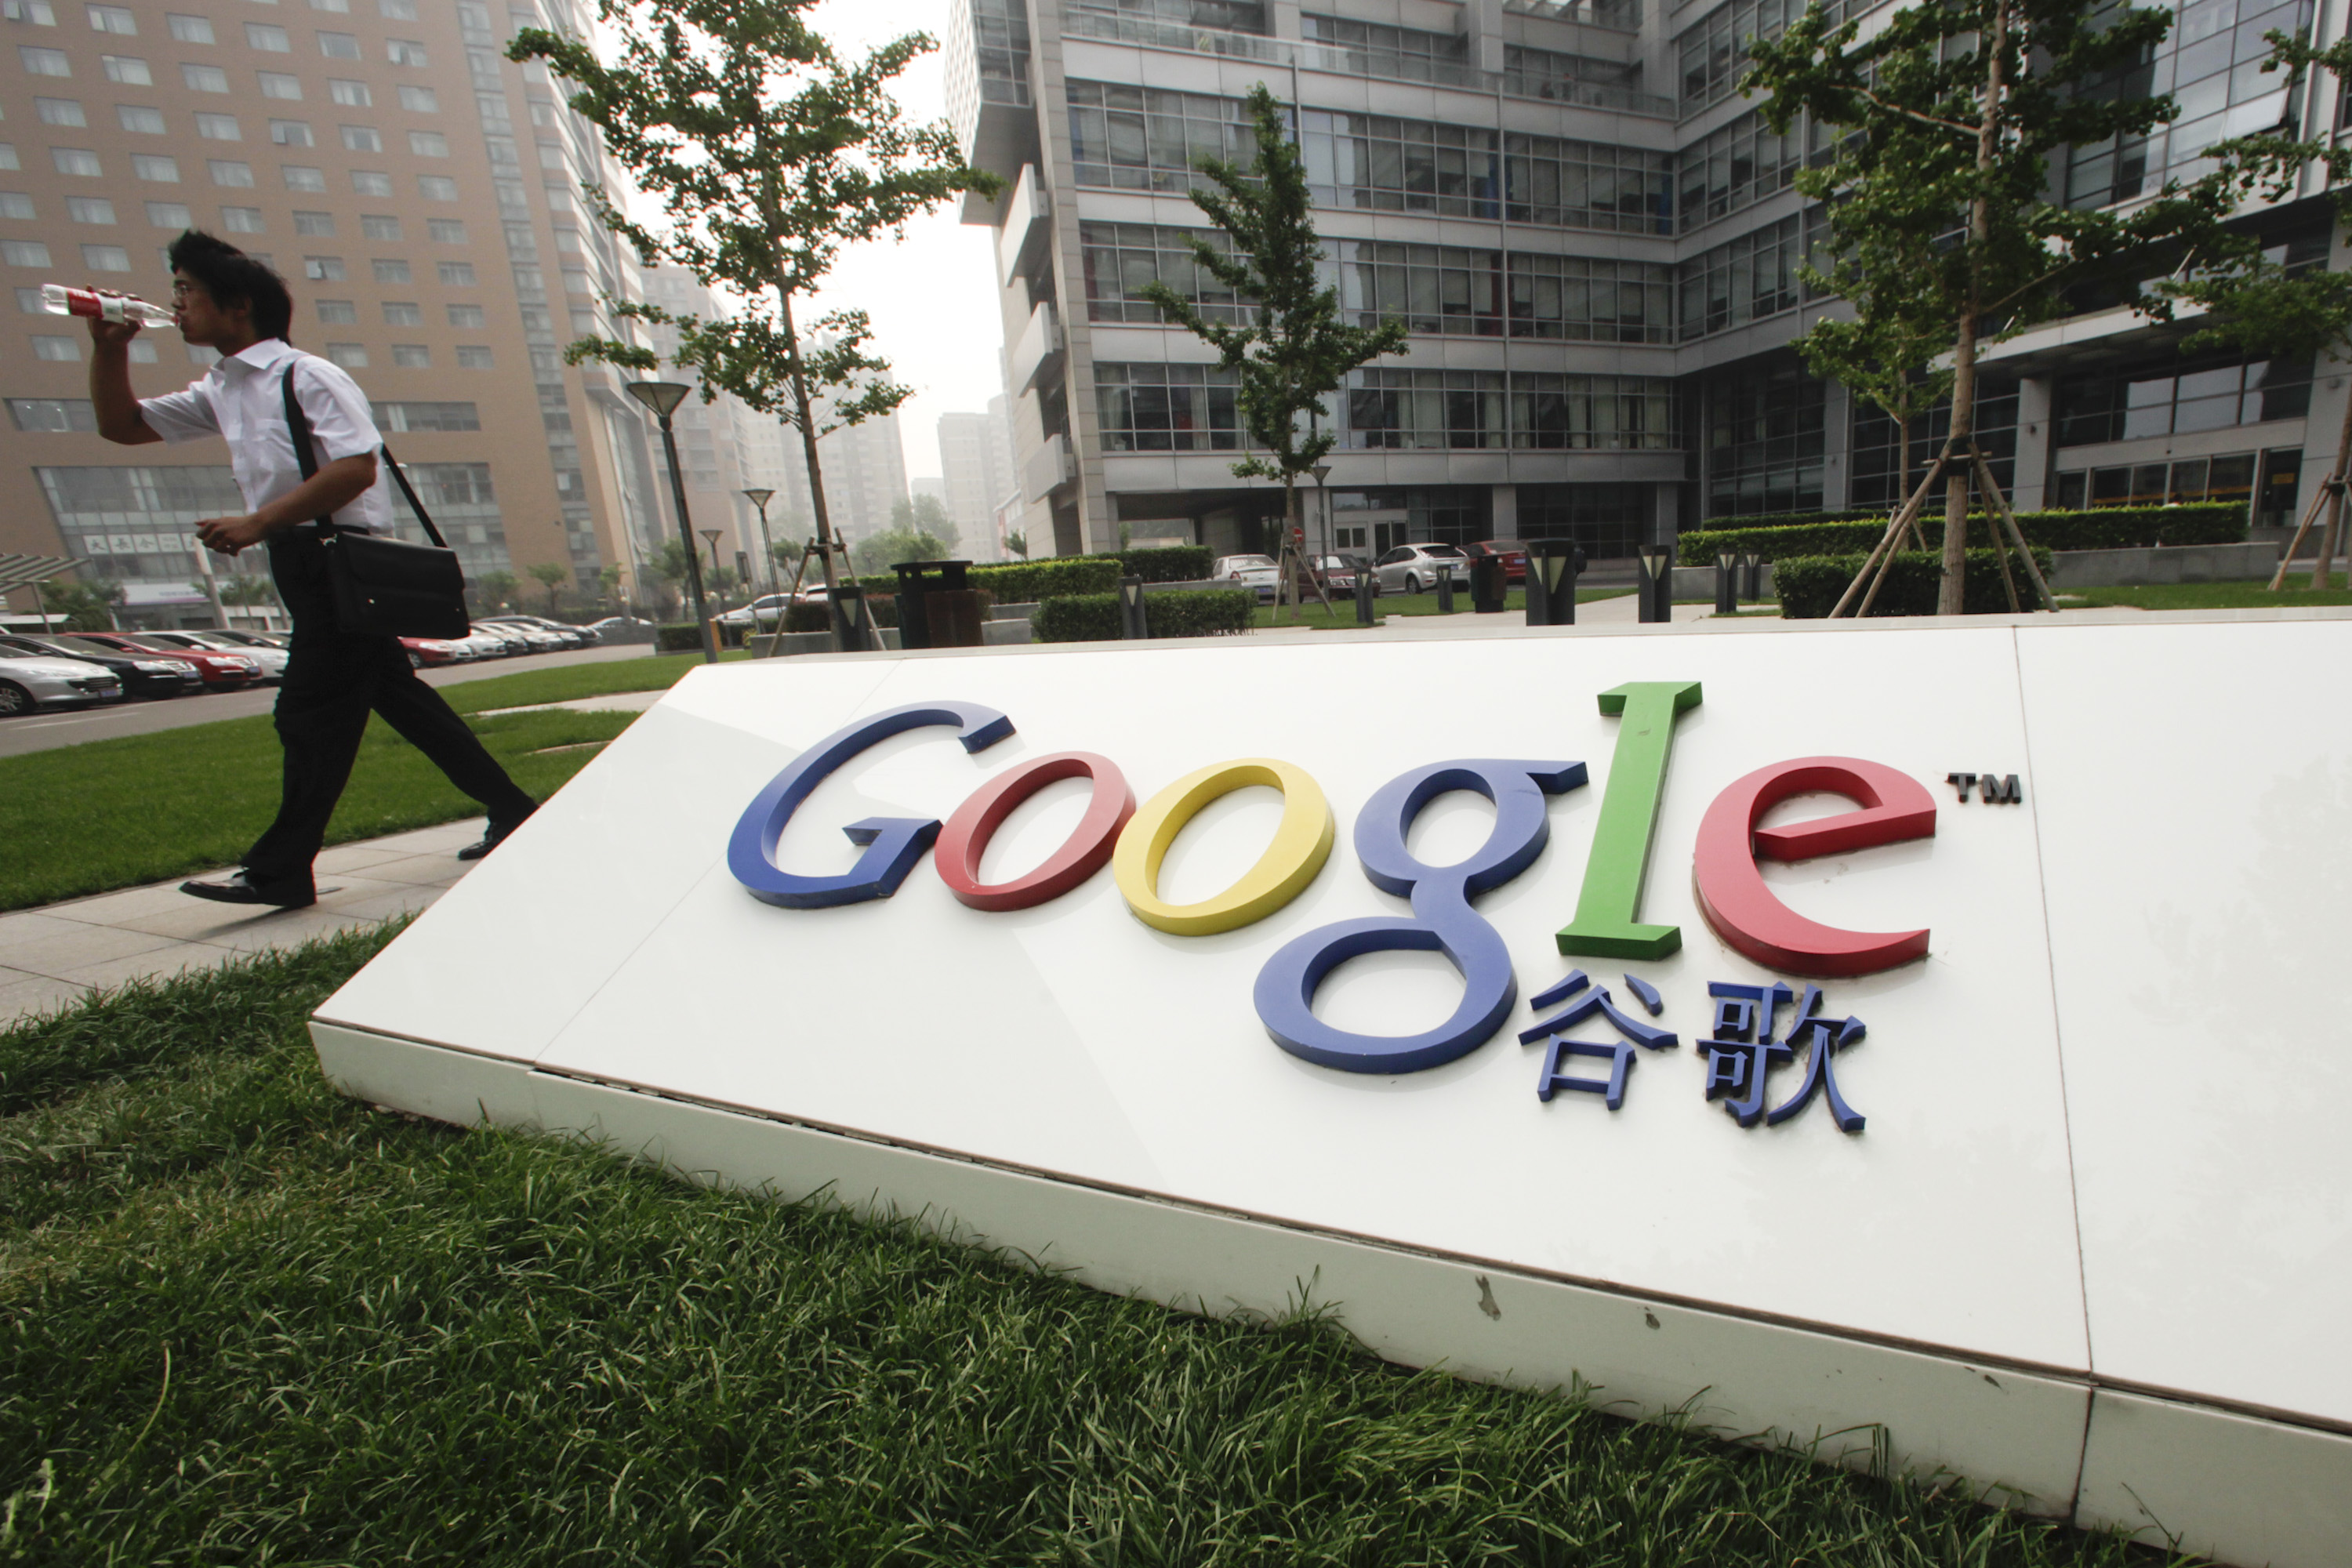 A pedestrian walks past Google Inc.'s China headquarters in Beijing, China, on Tuesday, June 29, 2010. (Bloomberg&mdash;Bloomberg via Getty Images)